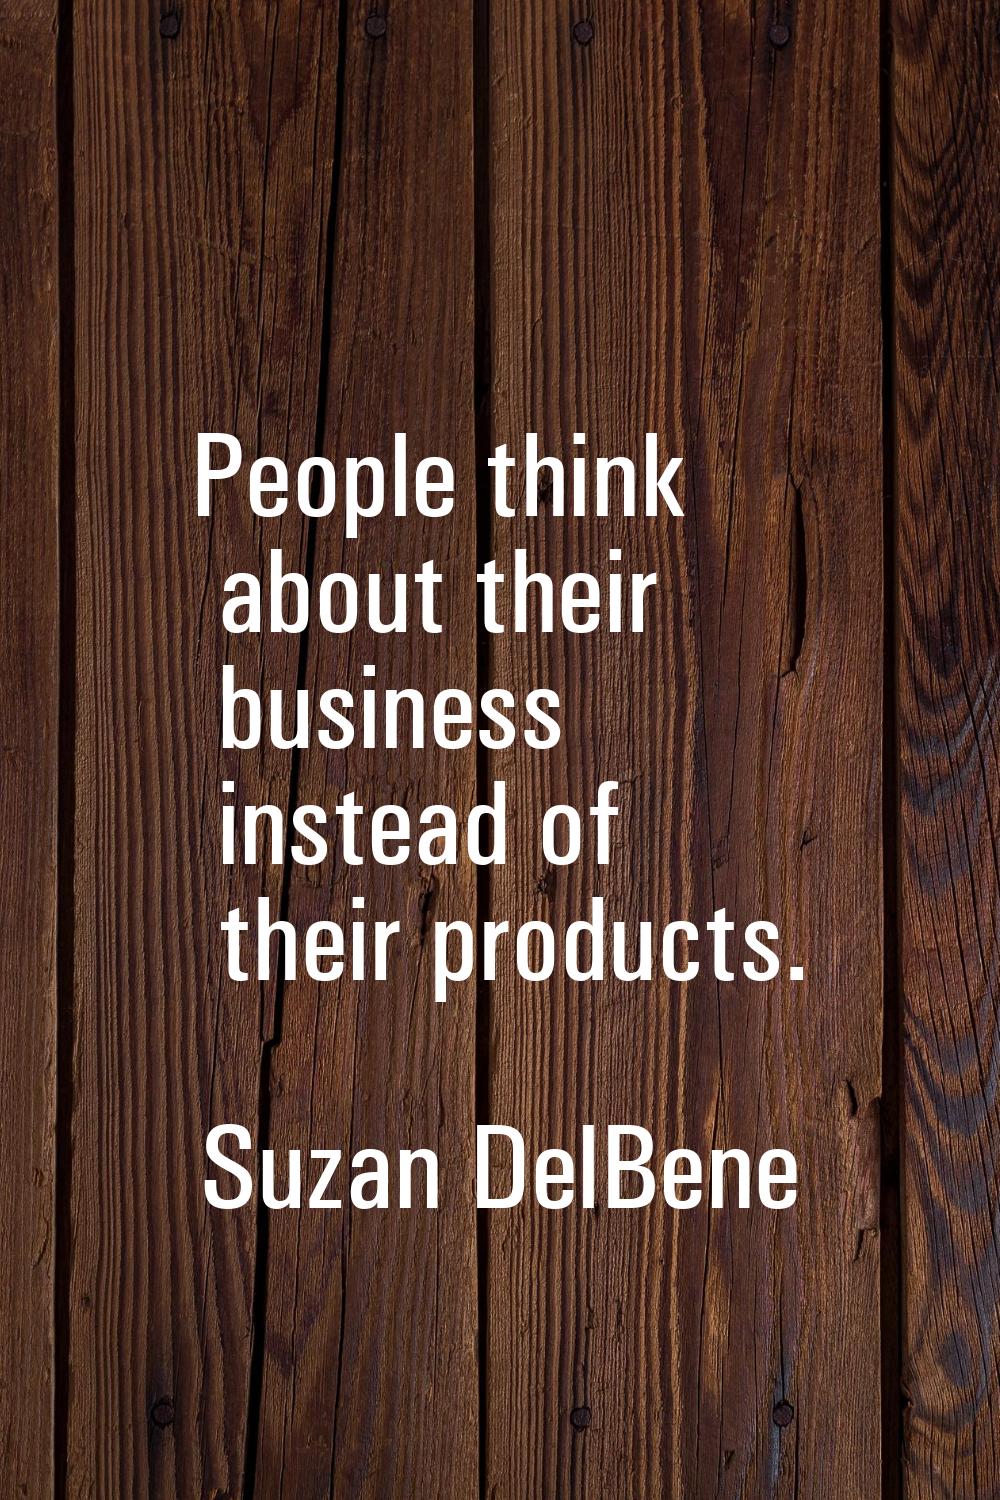 People think about their business instead of their products.